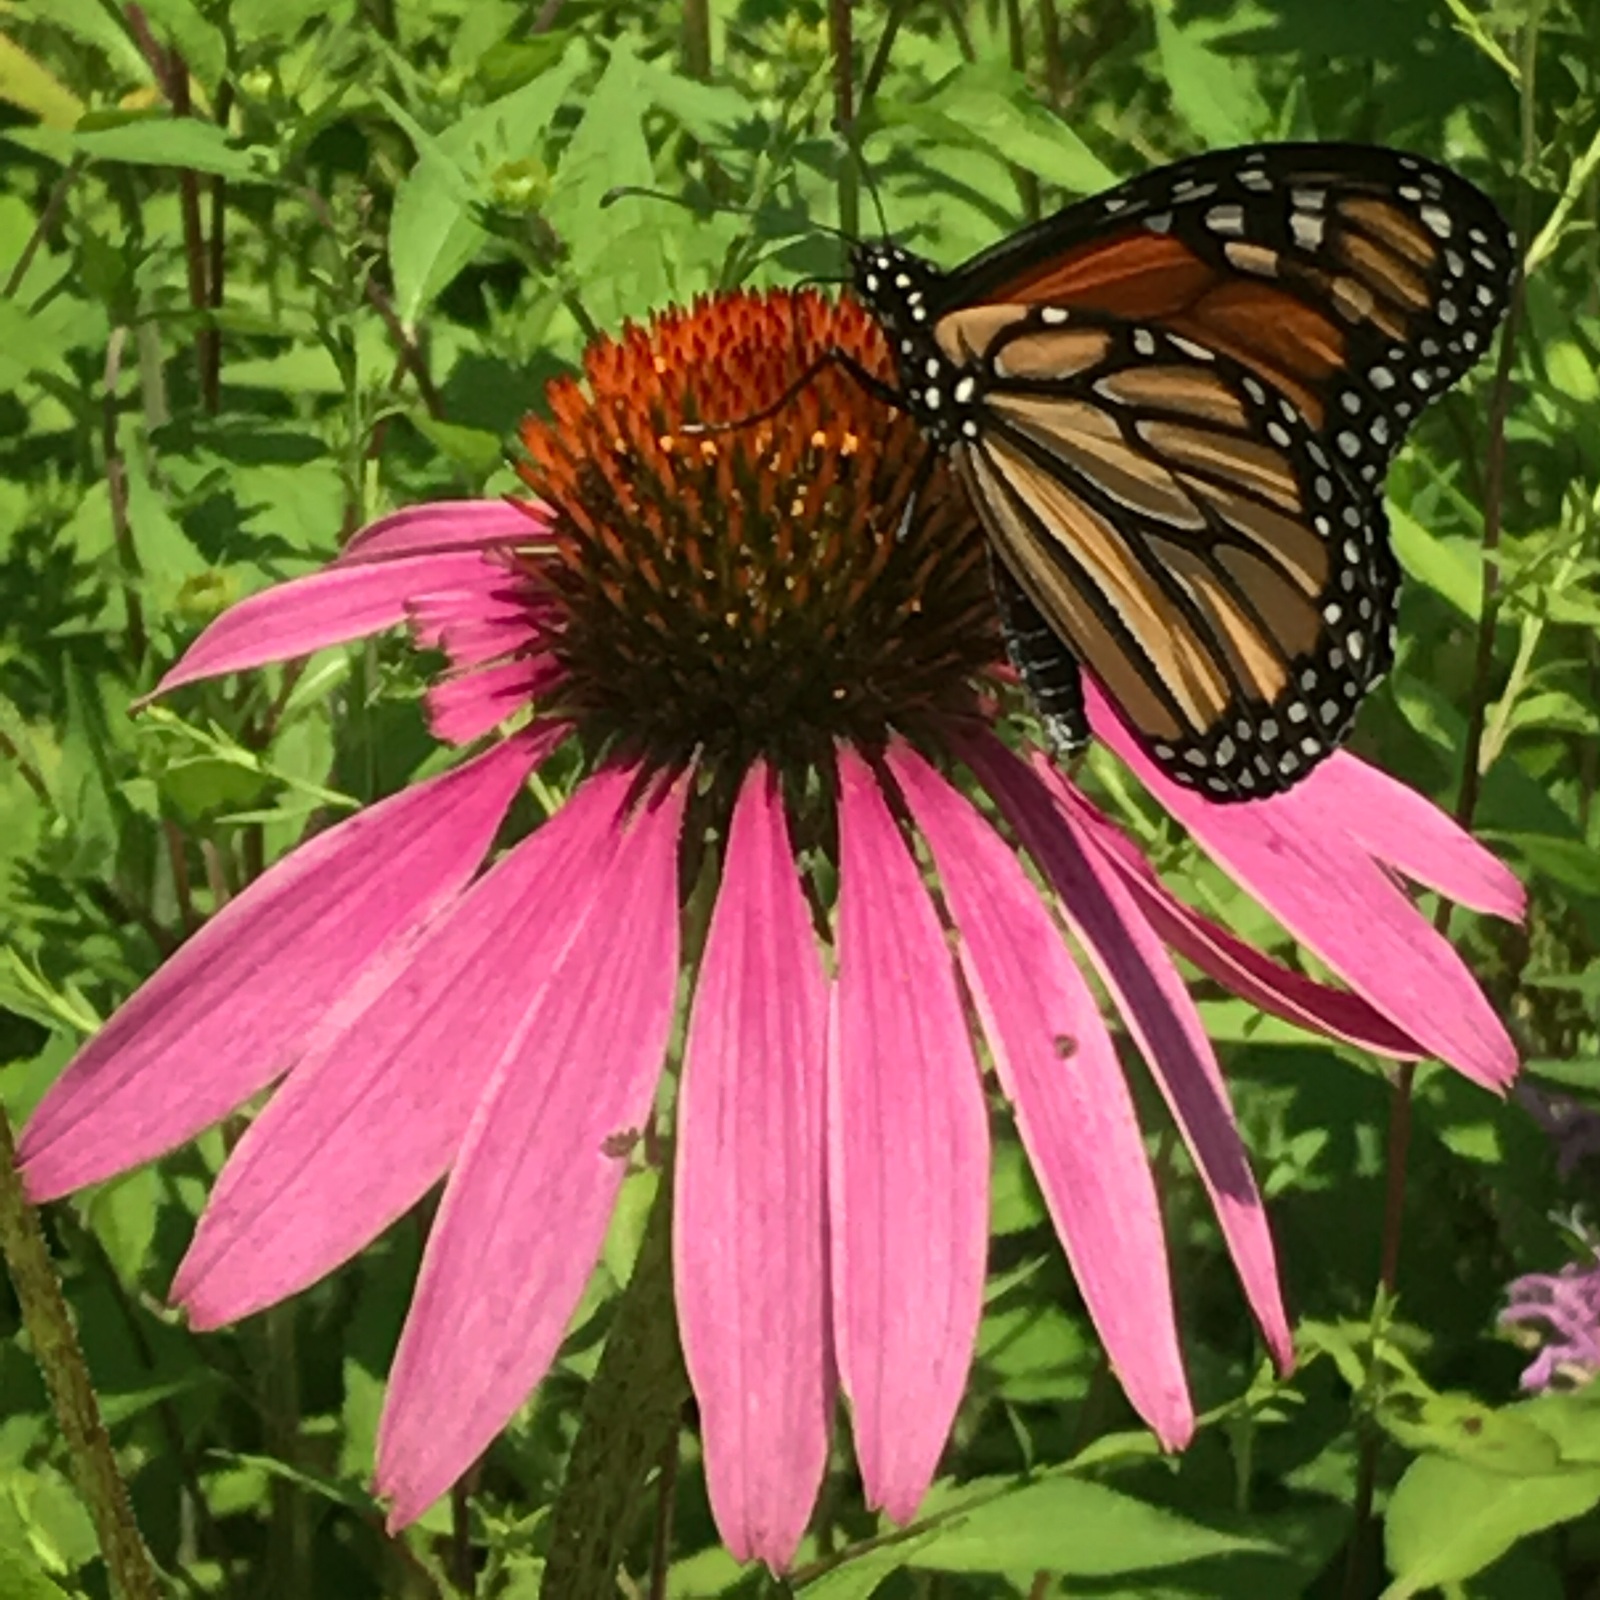 Coneflower and Friend